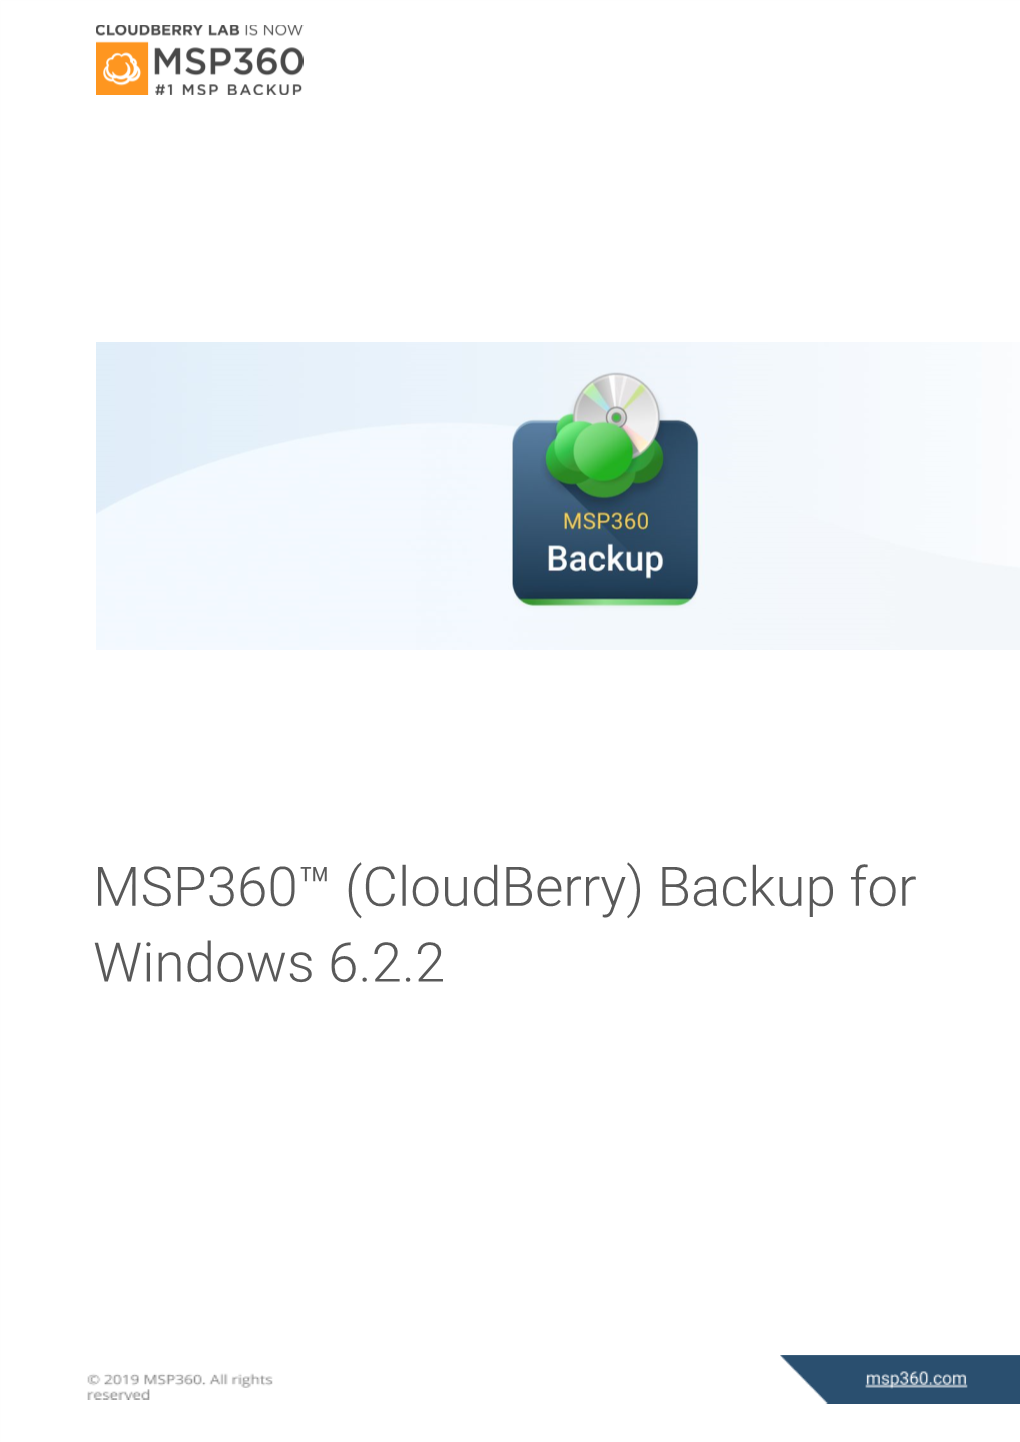 MSP360™ (Cloudberry) Backup for Windows 6.2.2